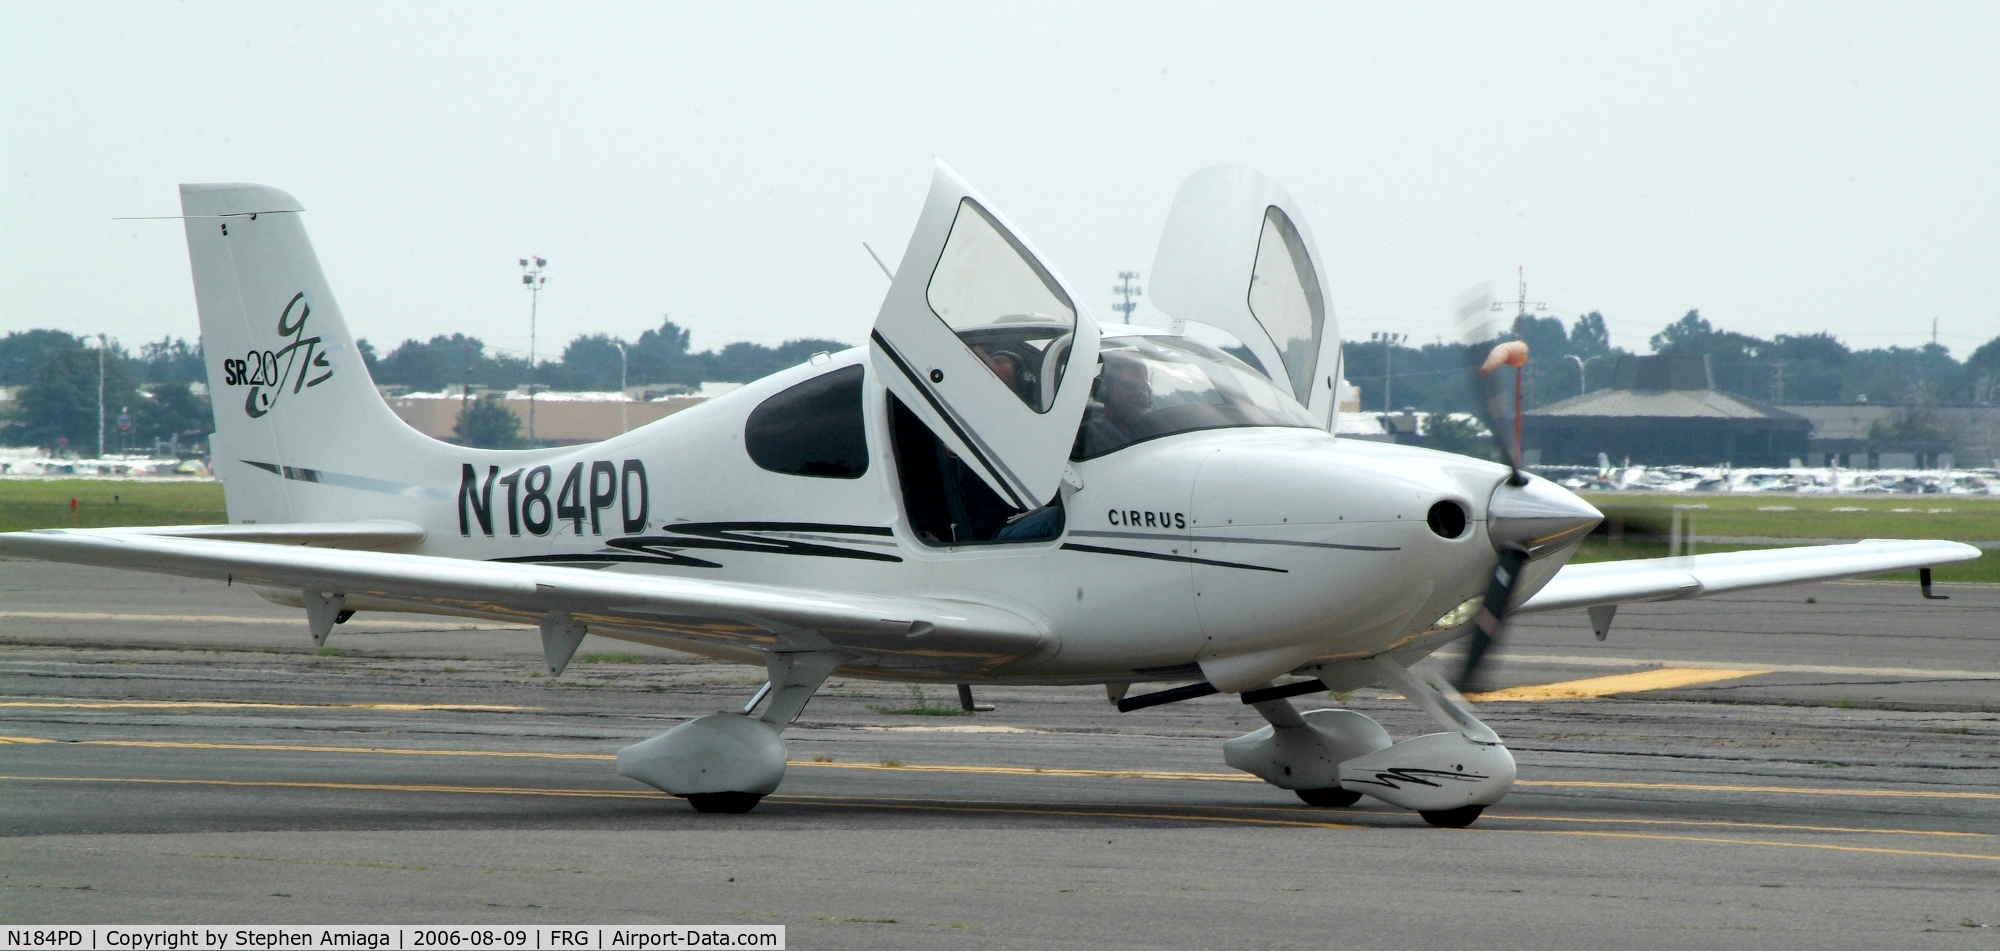 N184PD, 2005 Cirrus SR20 C/N 1571, When you don't buy the 